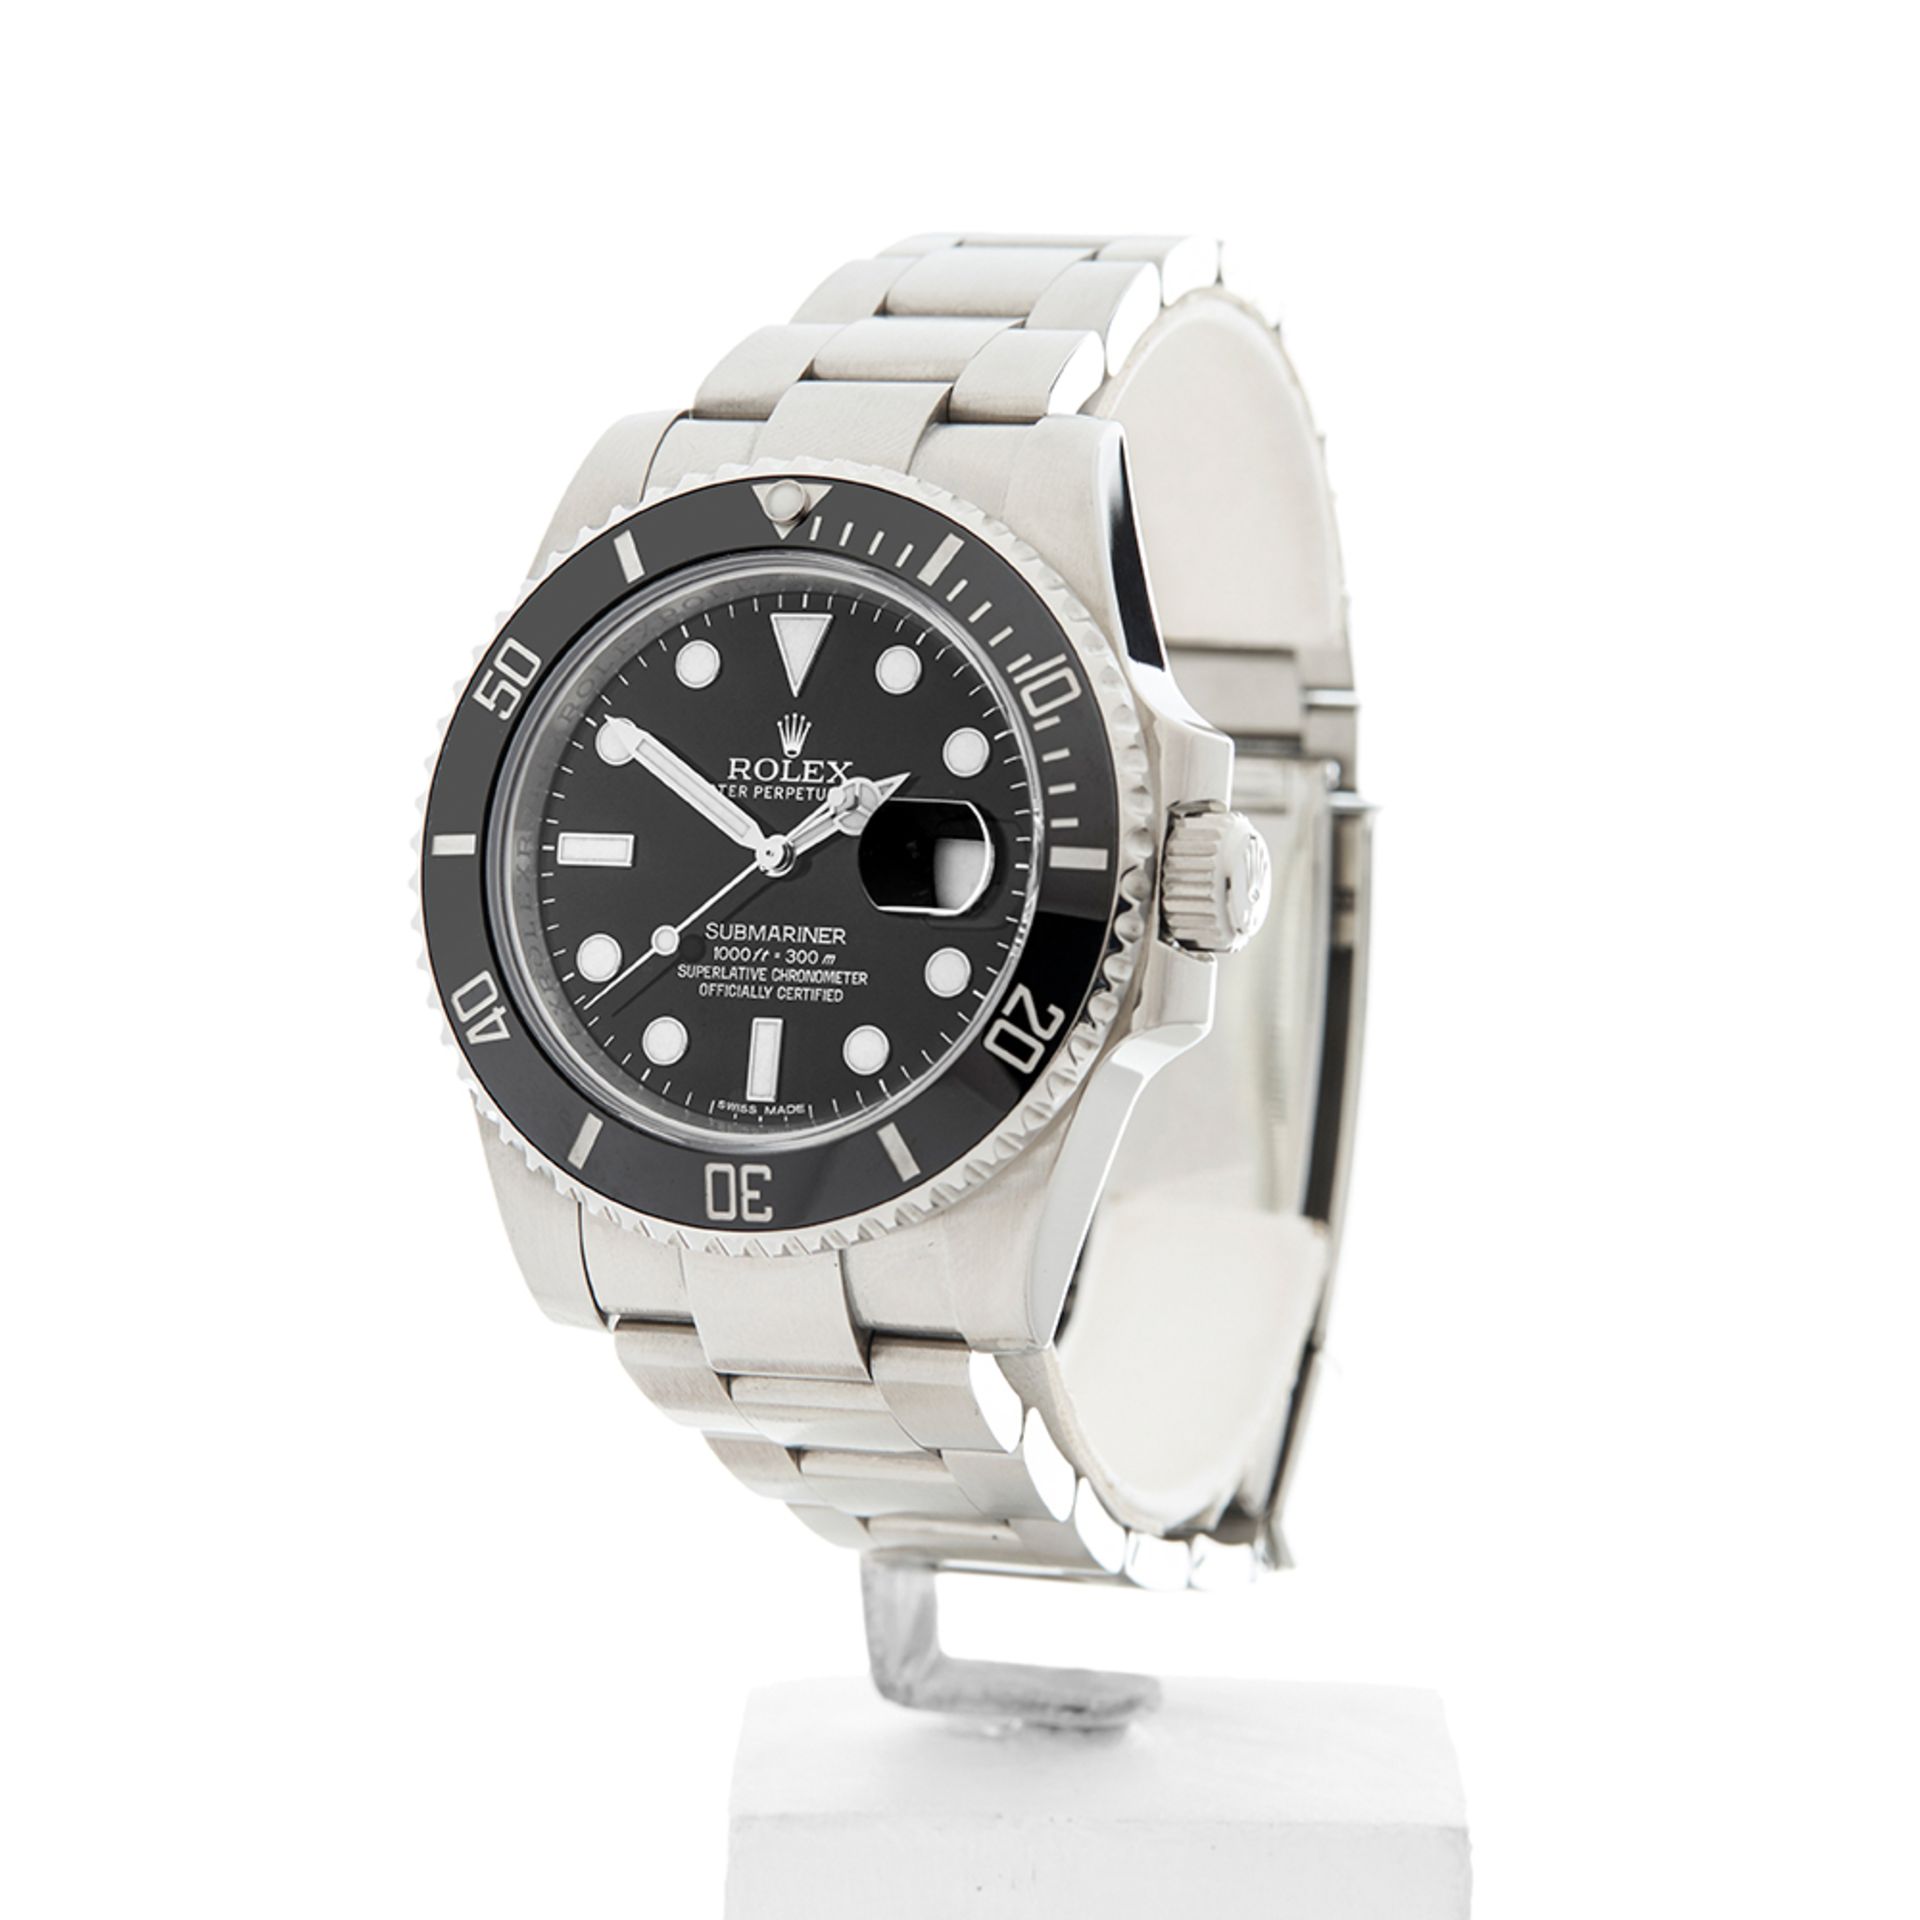 Submariner Date 40mm Stainless Steel 116610LN - Image 3 of 8